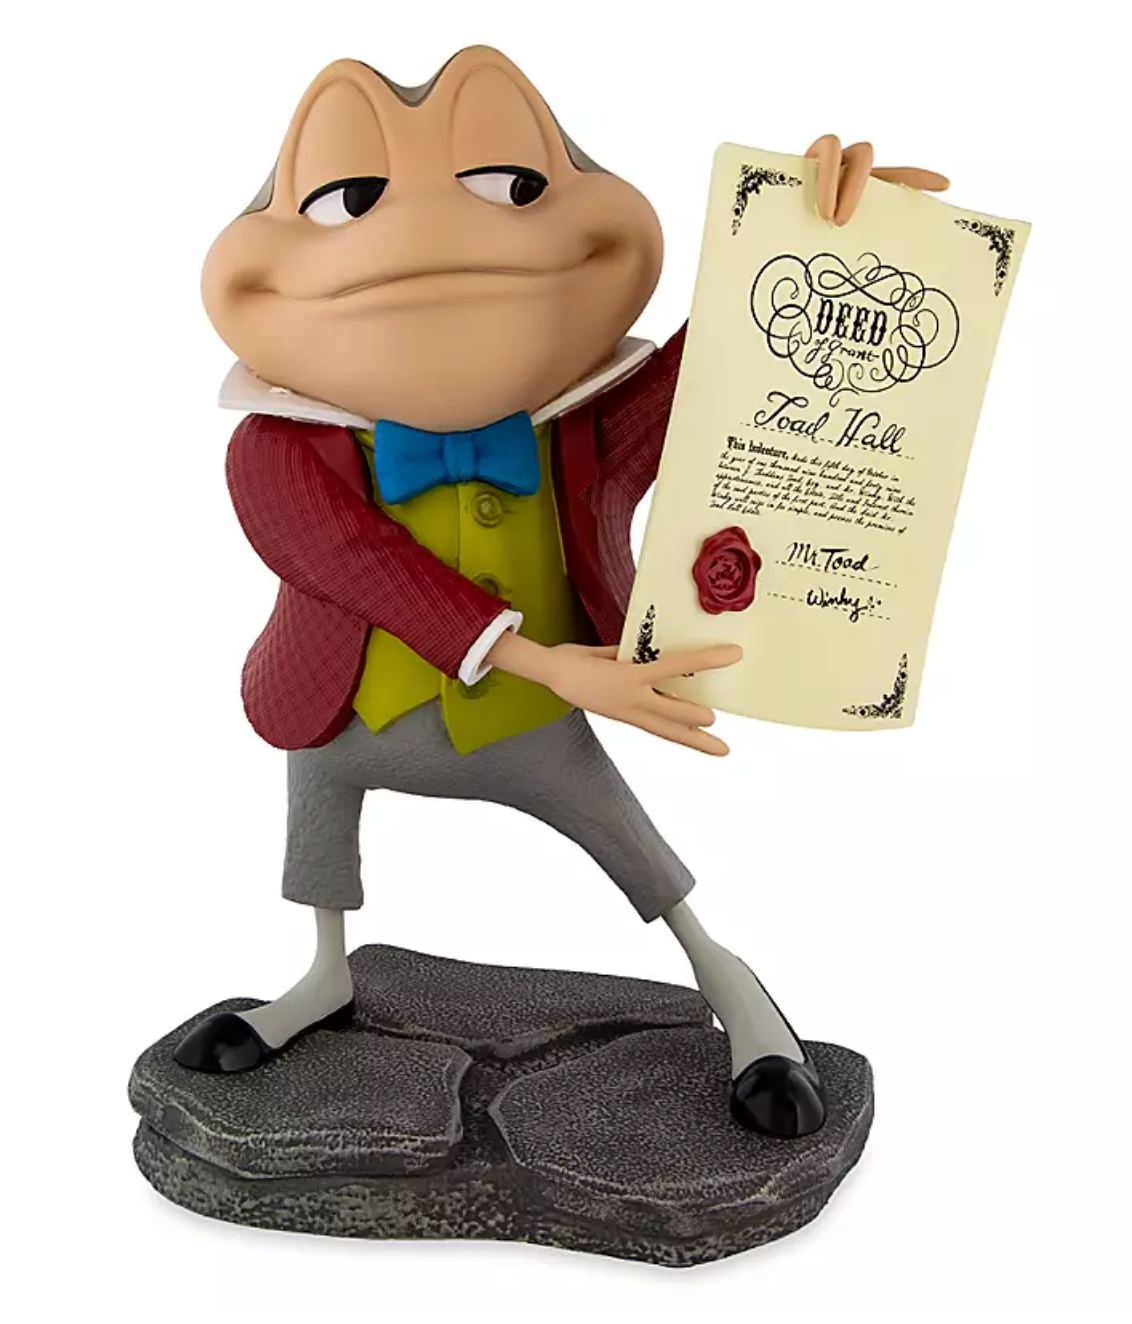 Disney Parks Toad Figure The Adventures of Ichabod and Mr. Toad Figurine Statue